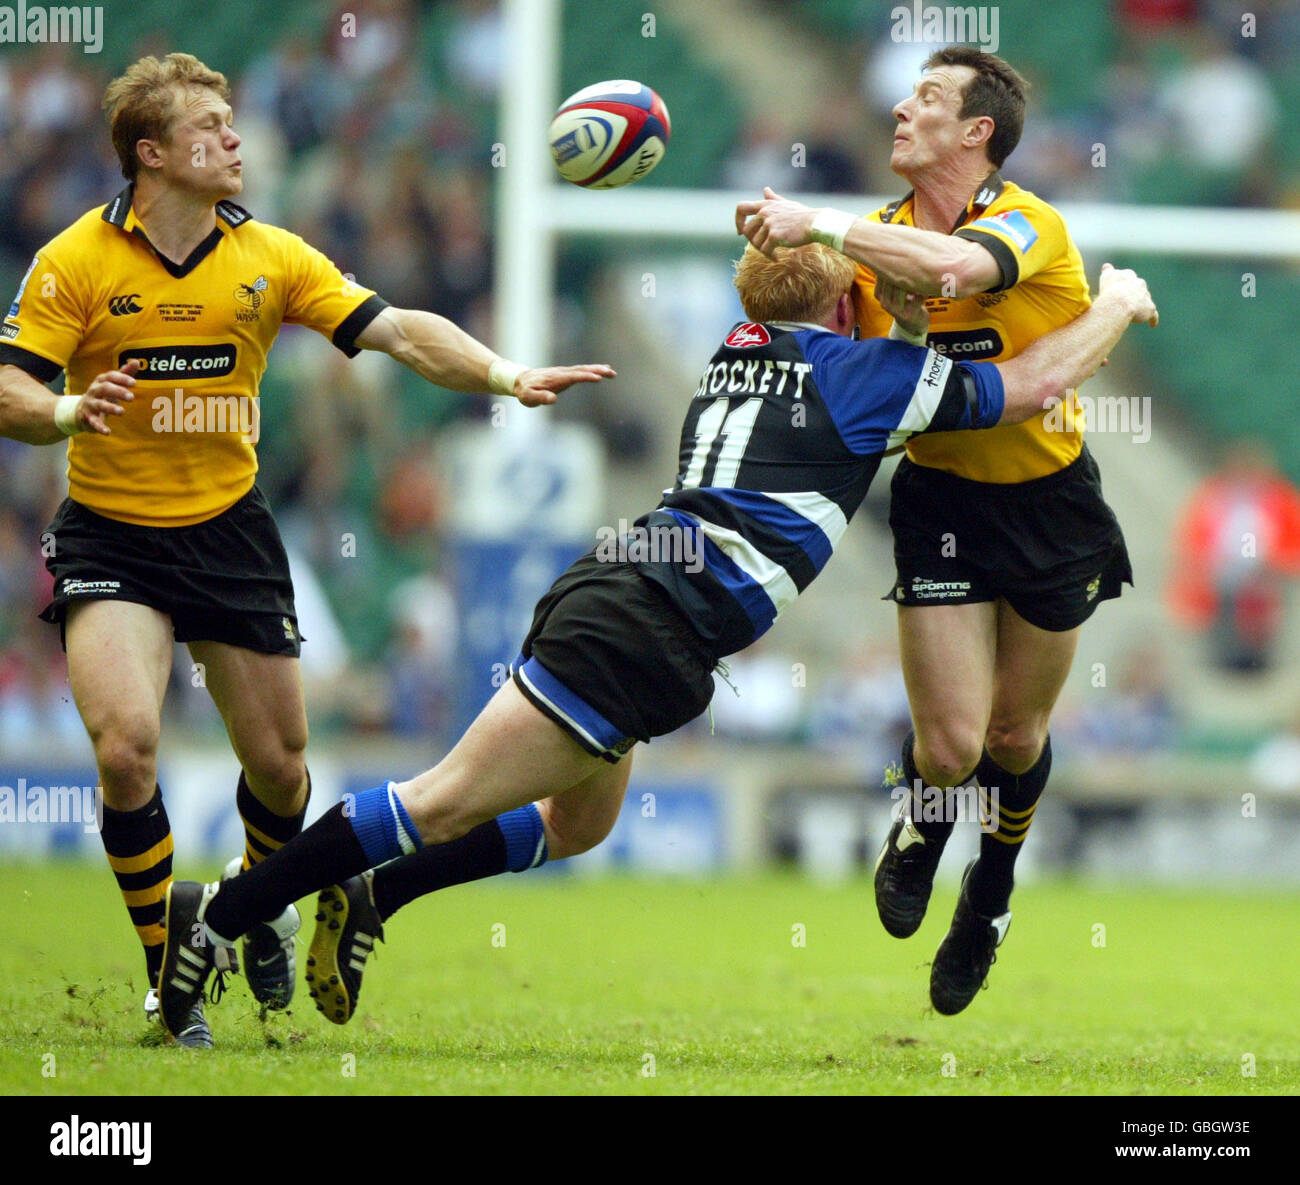 London Wasps' Rob Howley (r) offloads the ball to teammate Josh Lewsey (l) as he is tackled by Bath's Alex Crockett (c) Stock Photo